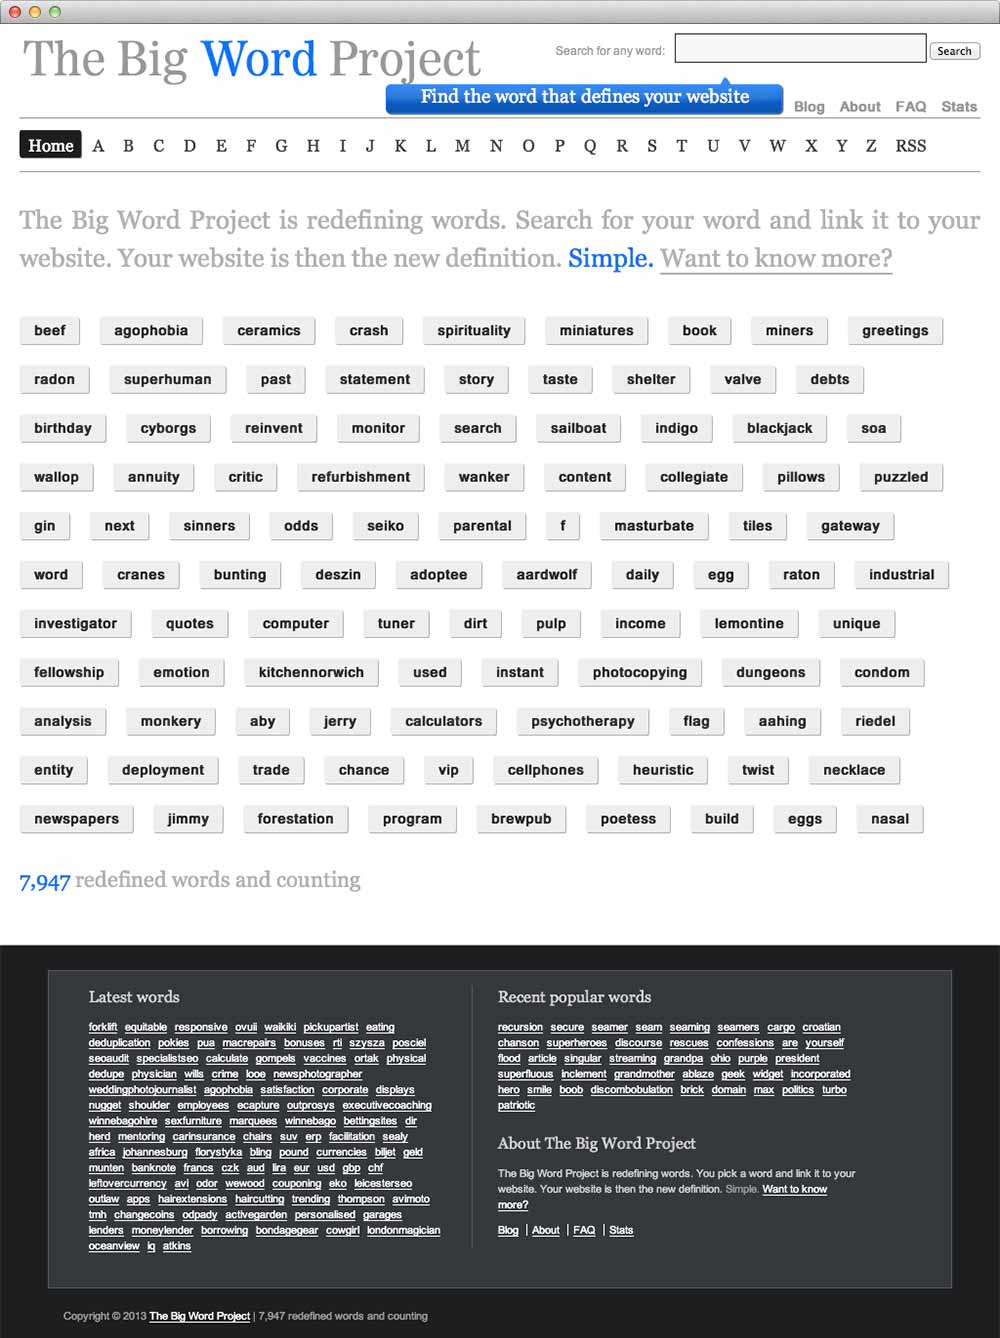 The Big Word Project